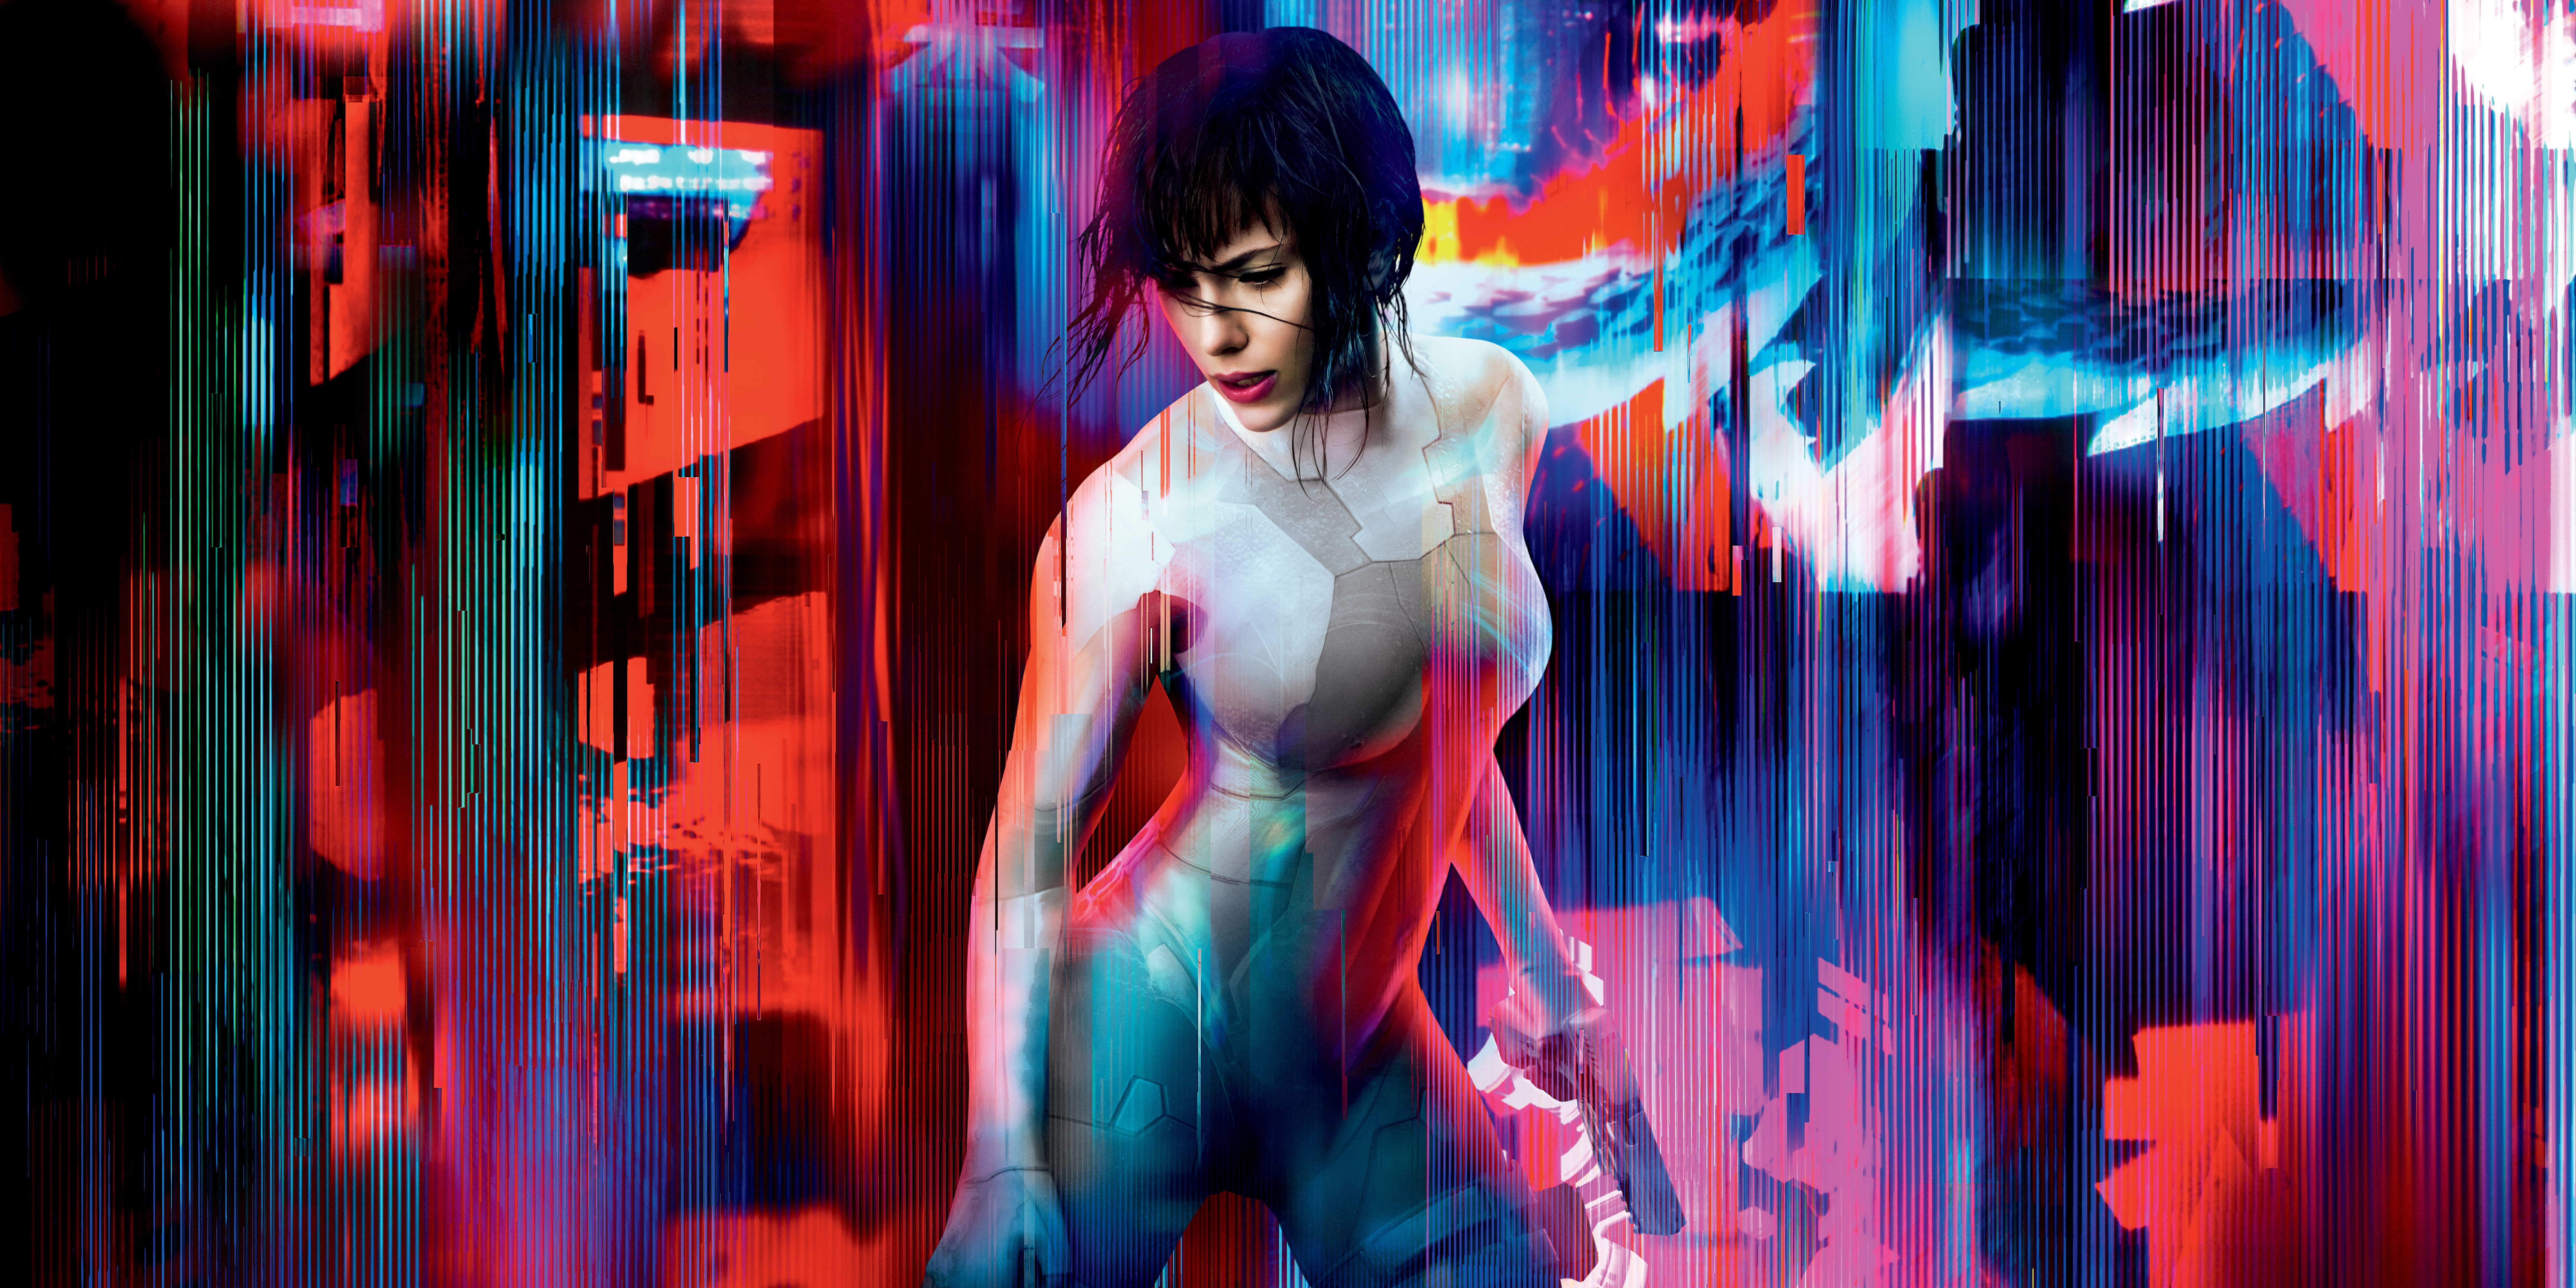 Movie Ghost in the Shell (2017) 8k Ultra HD Wallpaper